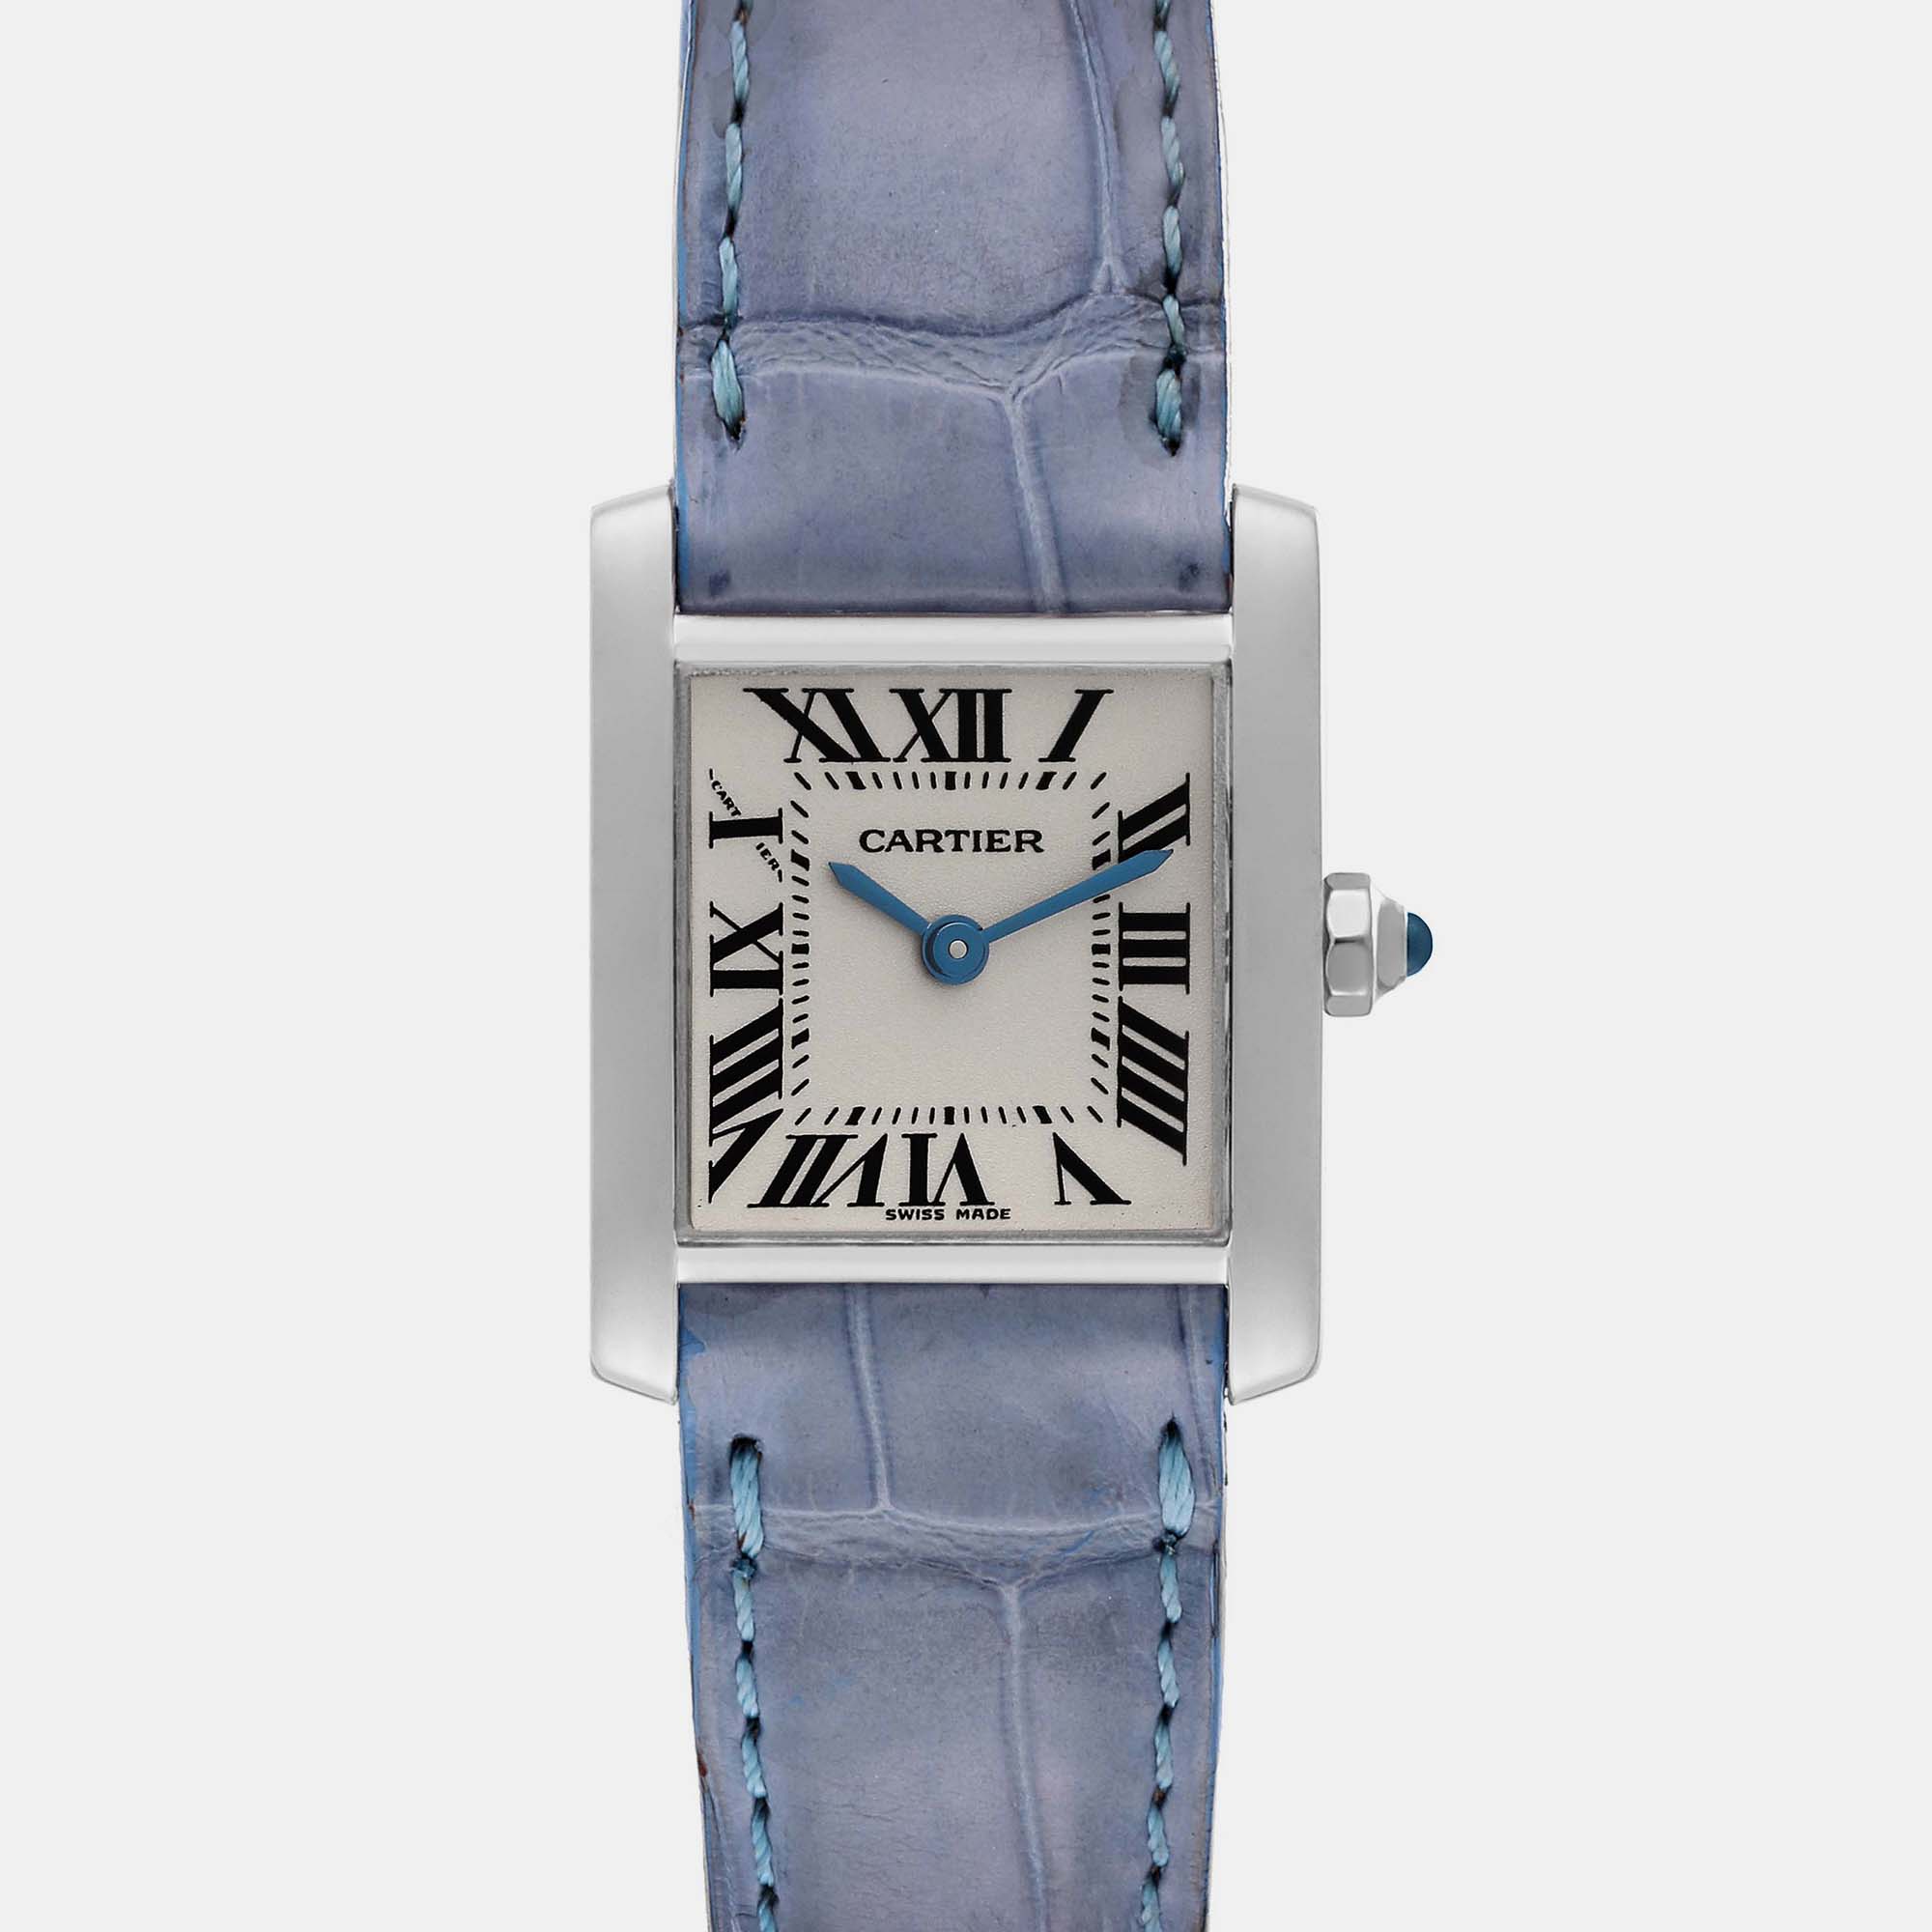 Cartier Tank Francaise White Gold Blue Strap Ladies Watch W5001256 20.0 X 25.0 Mm